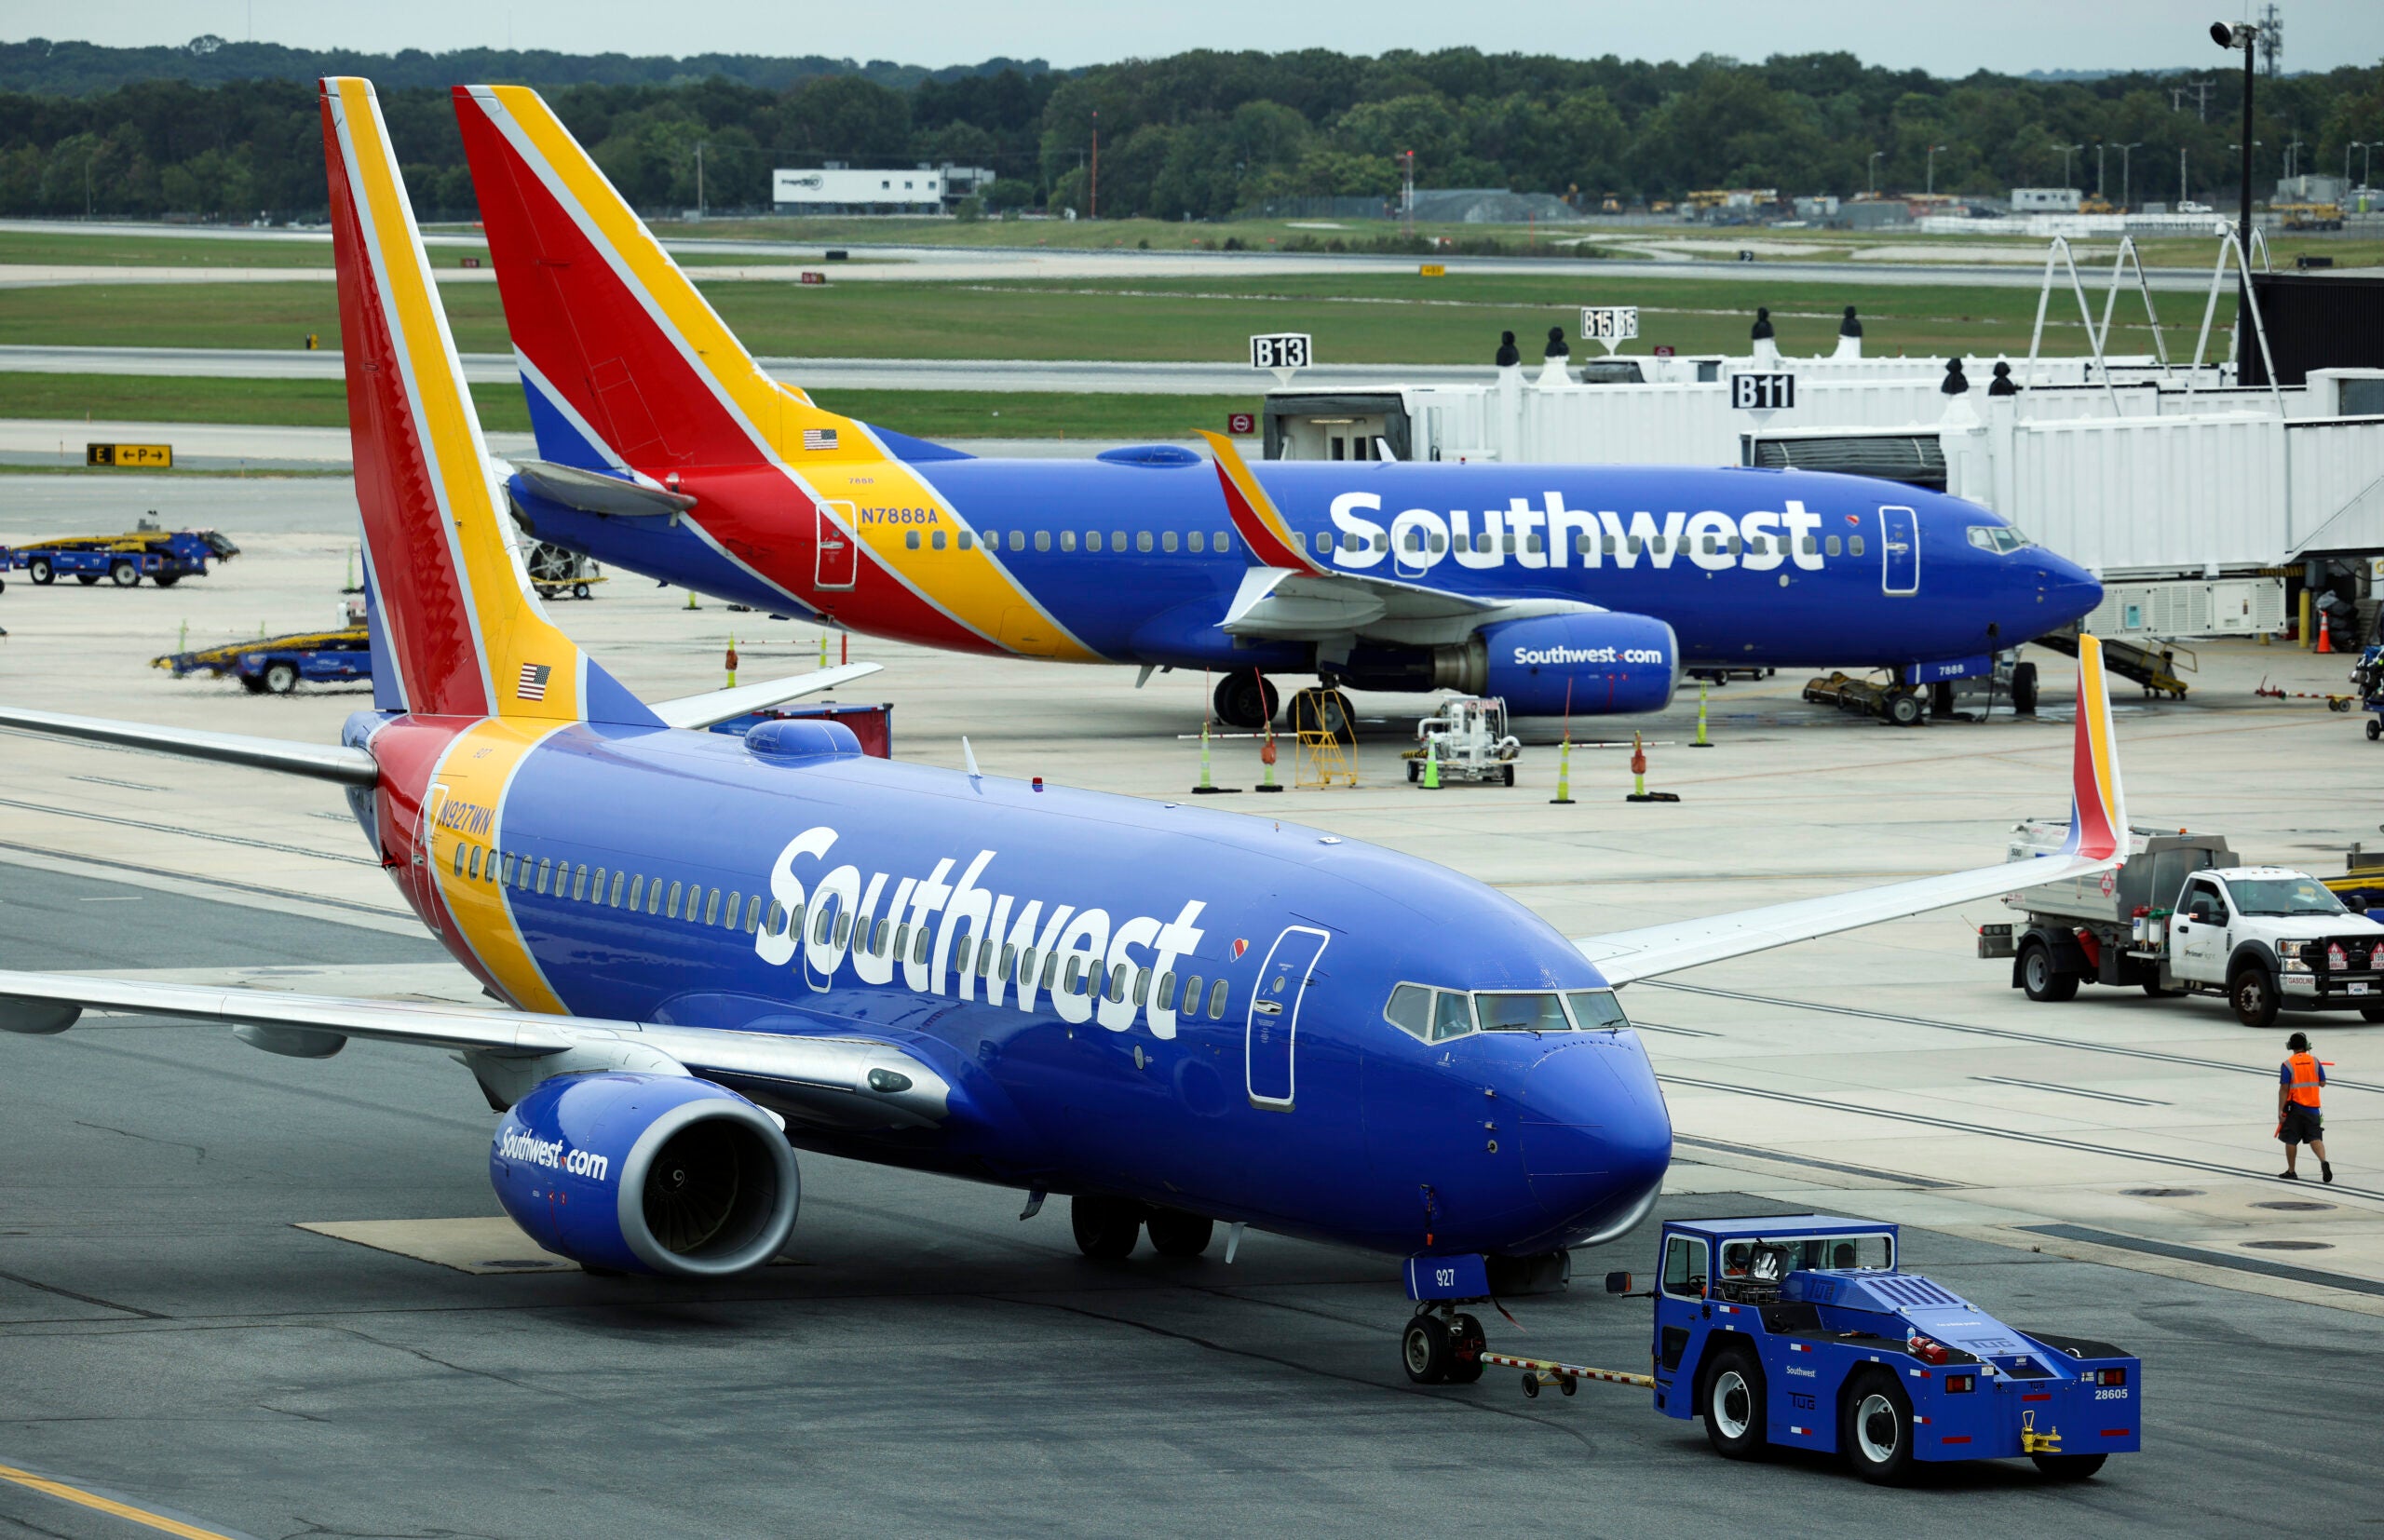 Southwest winter flash sale: Get one-way flights for as low as $29